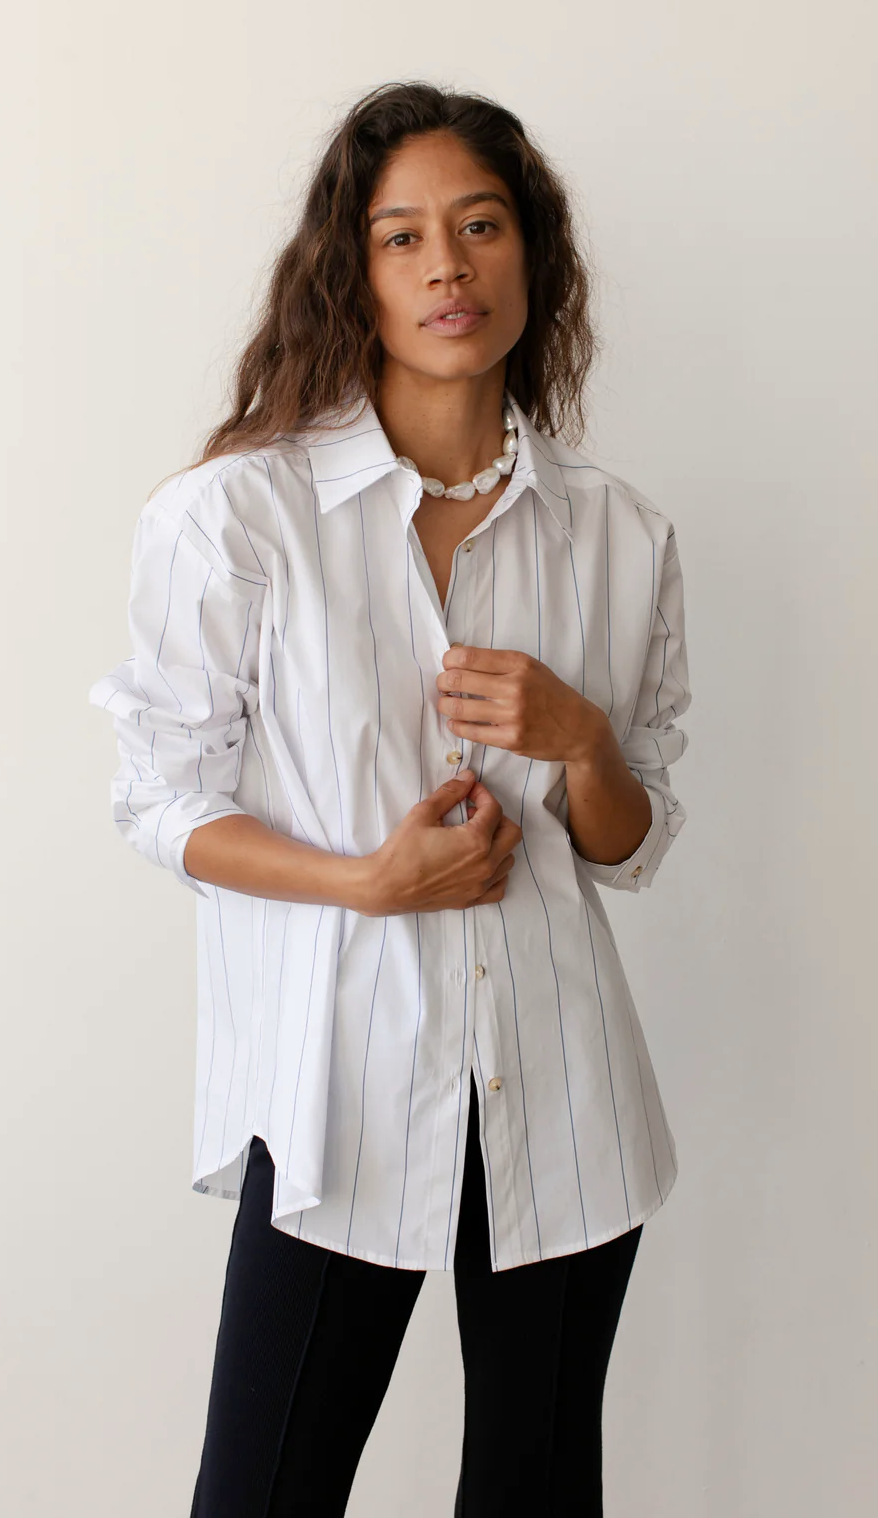 A woman stands against a plain background, wearing a white Donni Stripe Pop Shirt and black pants, featuring tortoise-like buttons. She is buttoning her cuffs. She has curly brown hair and a serene expression.